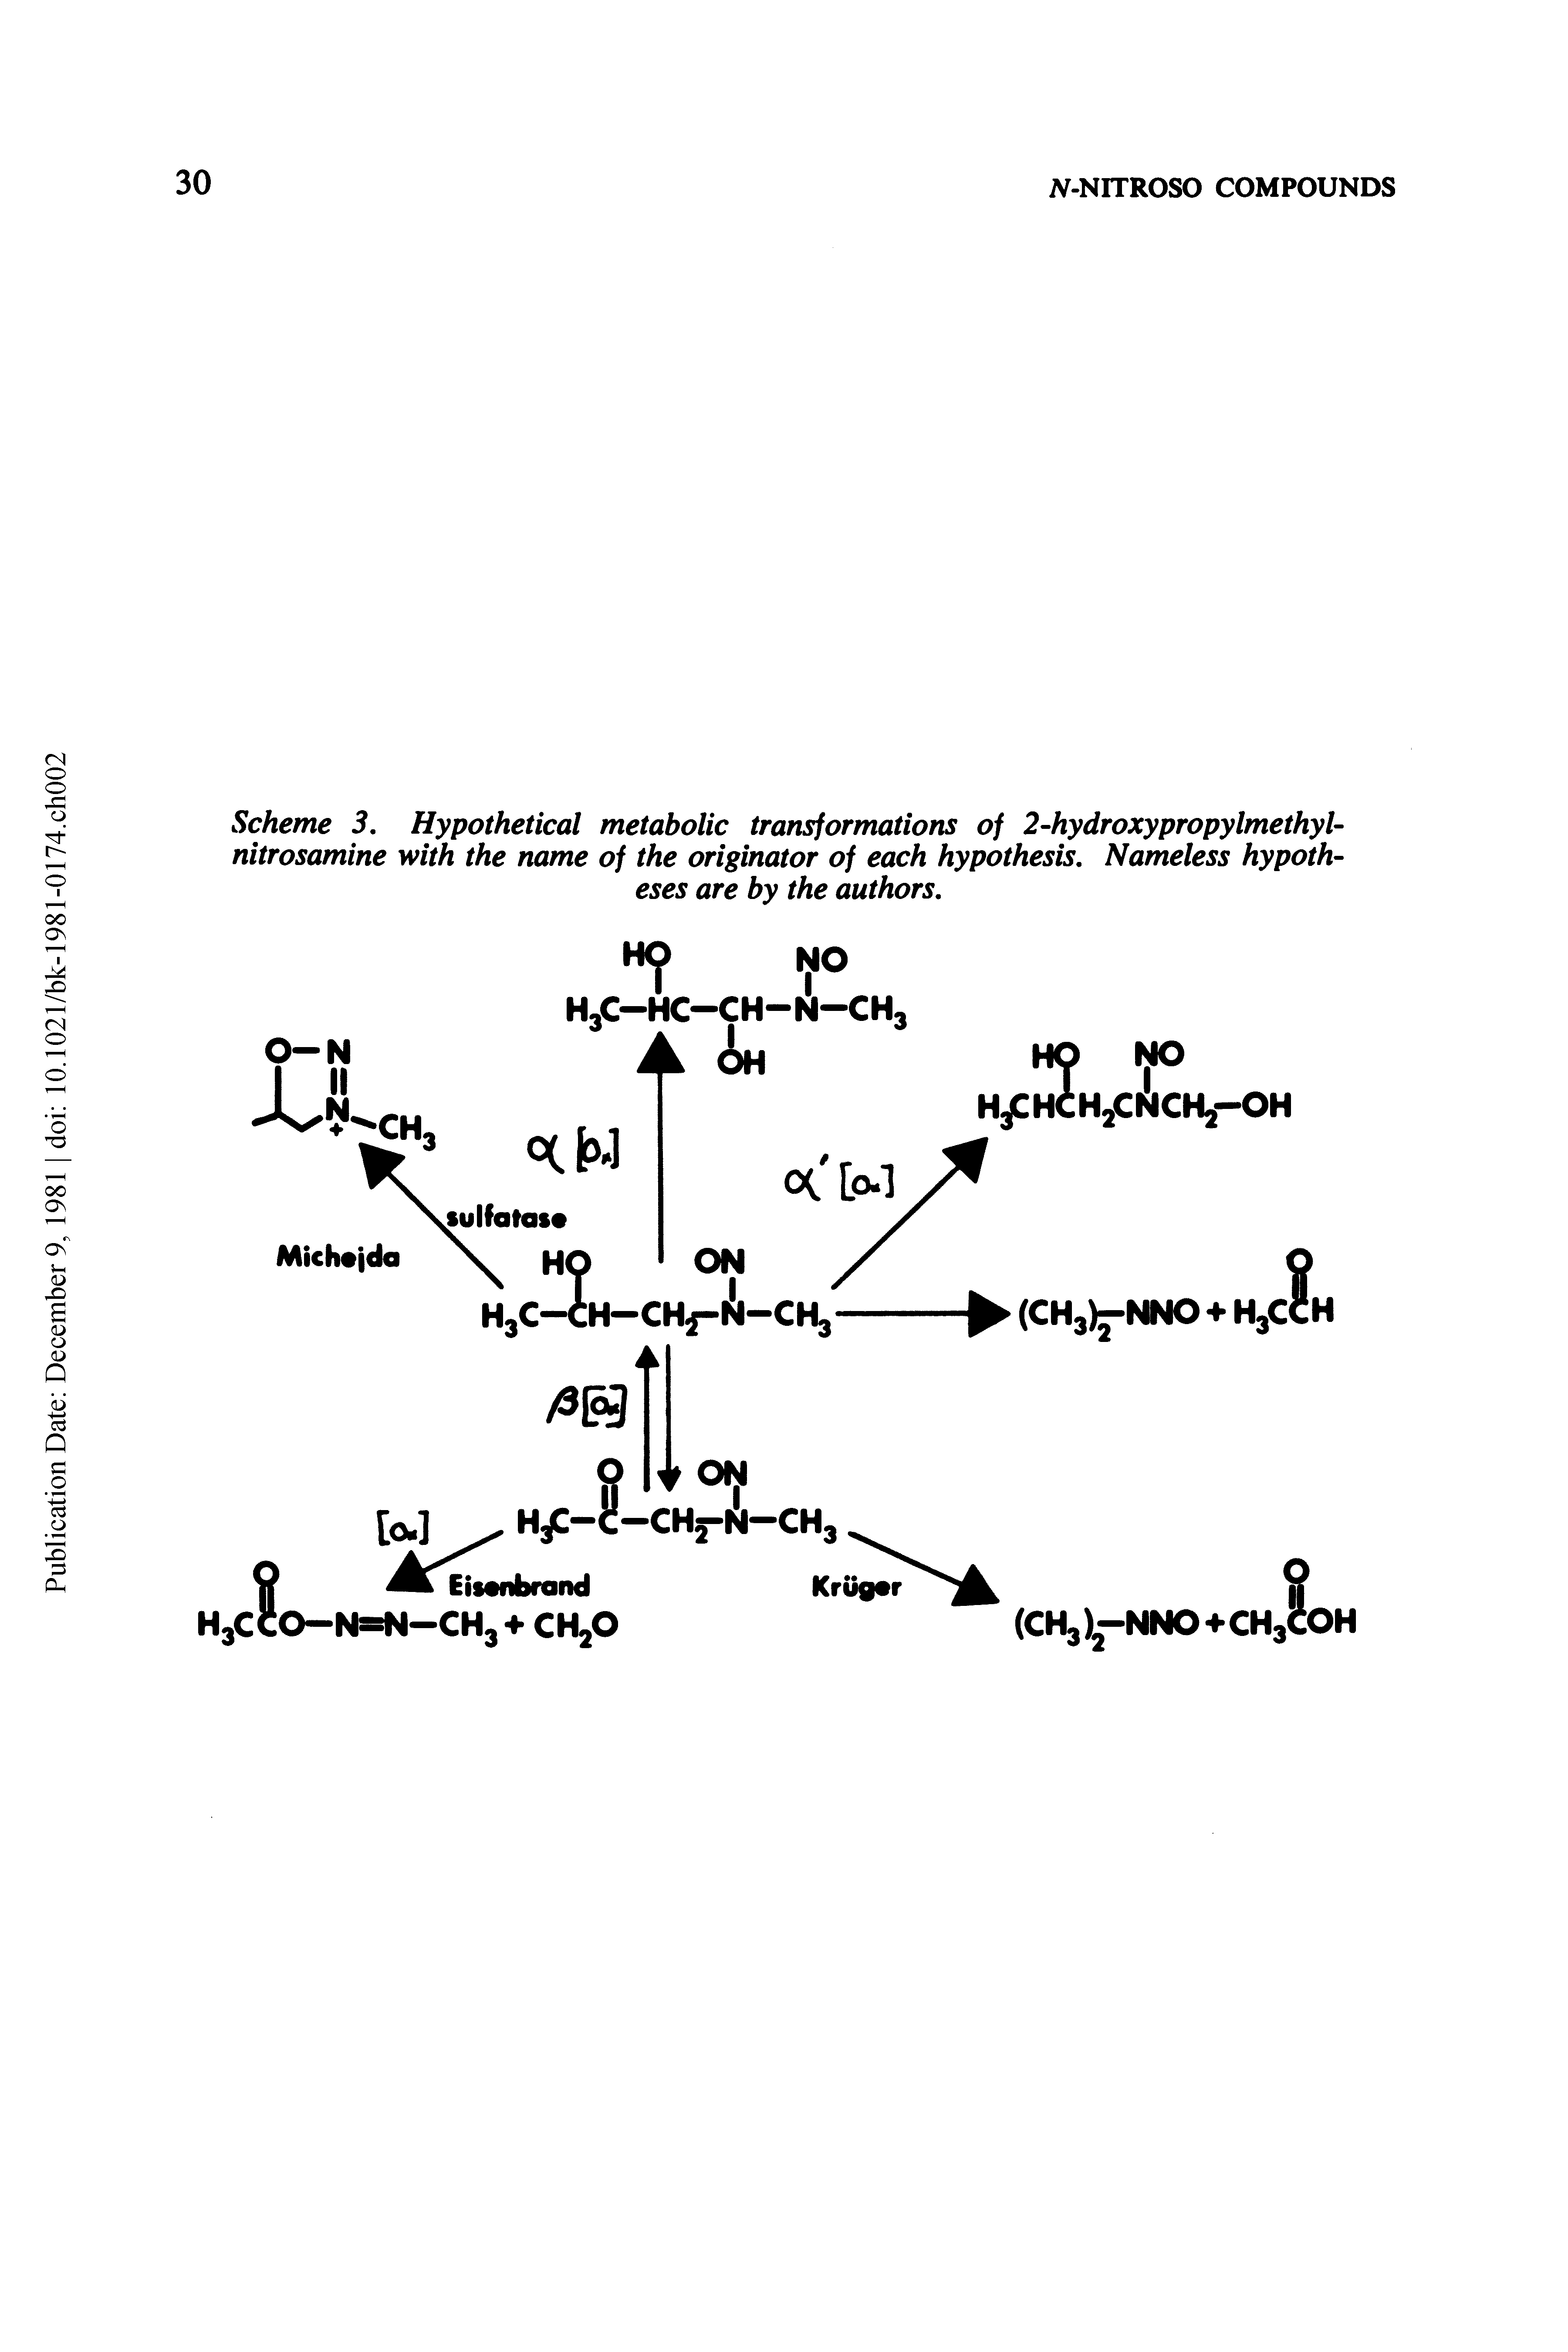 Scheme 3, Hypothetical metabolic transformations of 2-hydroxypropylmethyl nitrosamine with the name of the originator of each hypothesis. Nameless hypotheses are by the authors.